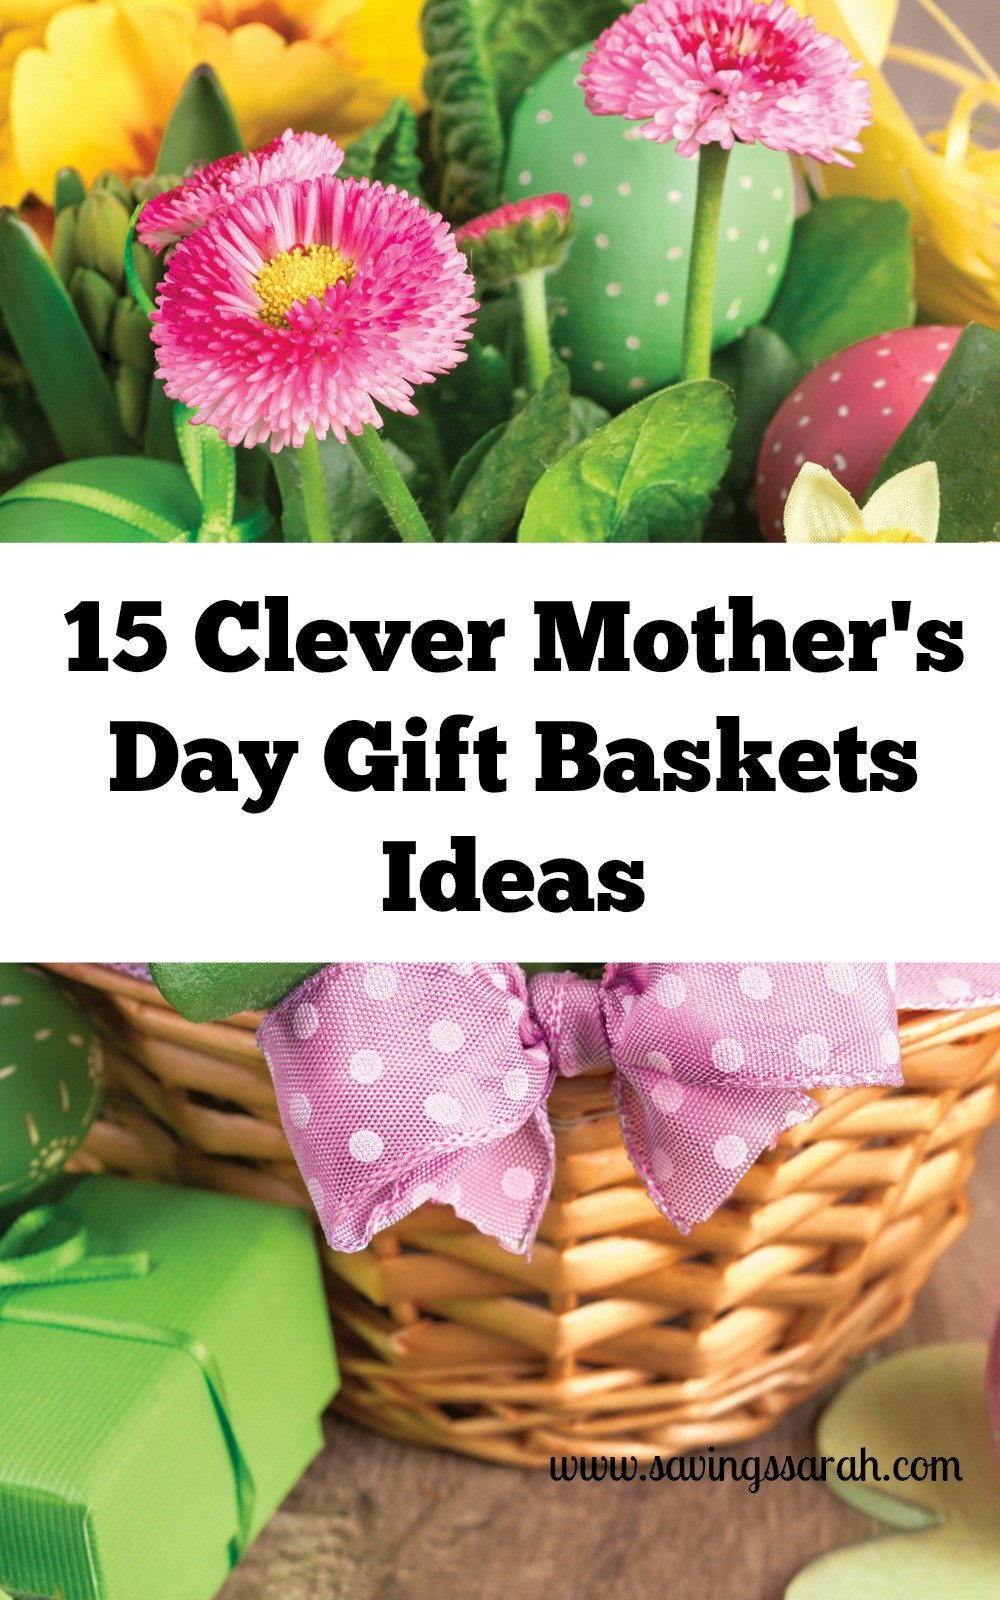 Mother's Day 2018 Gift Ideas
 15 Clever Mother s Day Gift Baskets Ideas Earning and